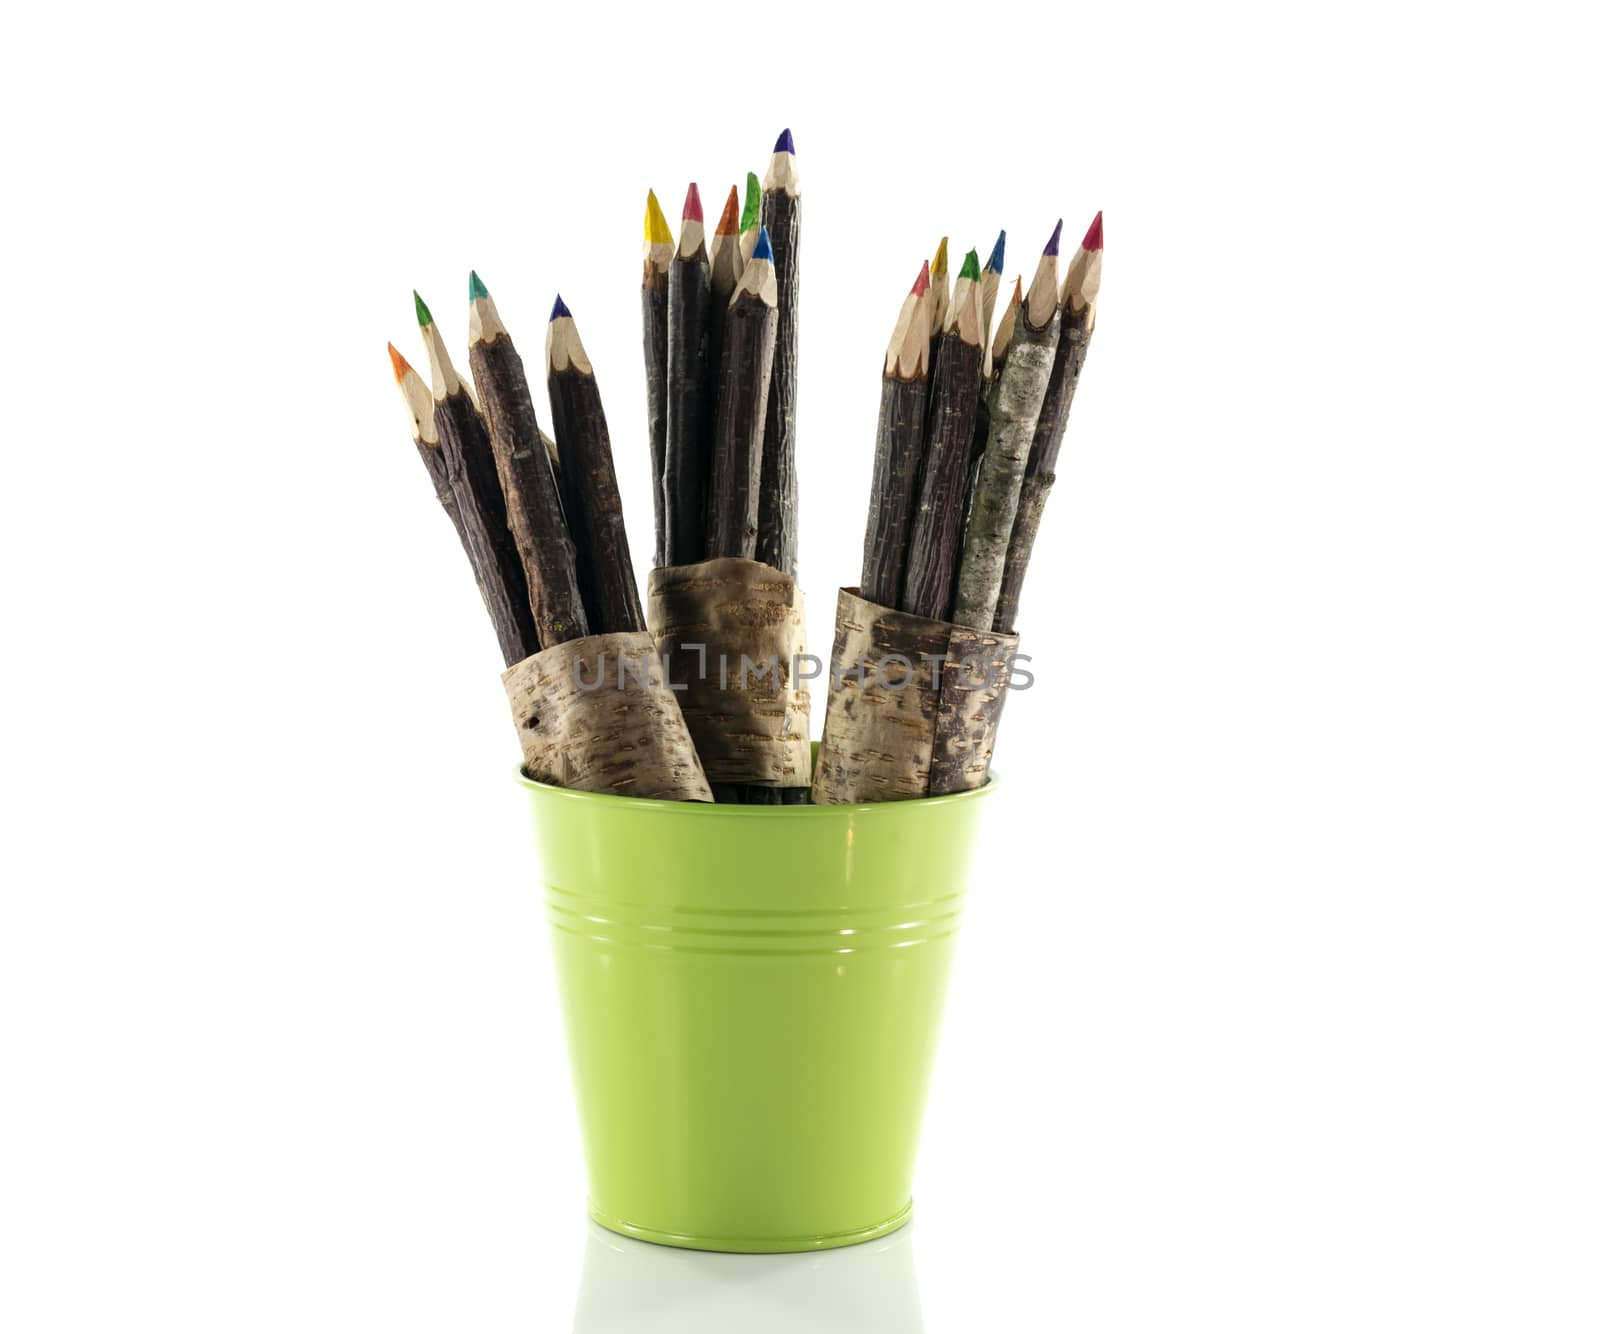 original wooden pencils in green orange and yellow in container